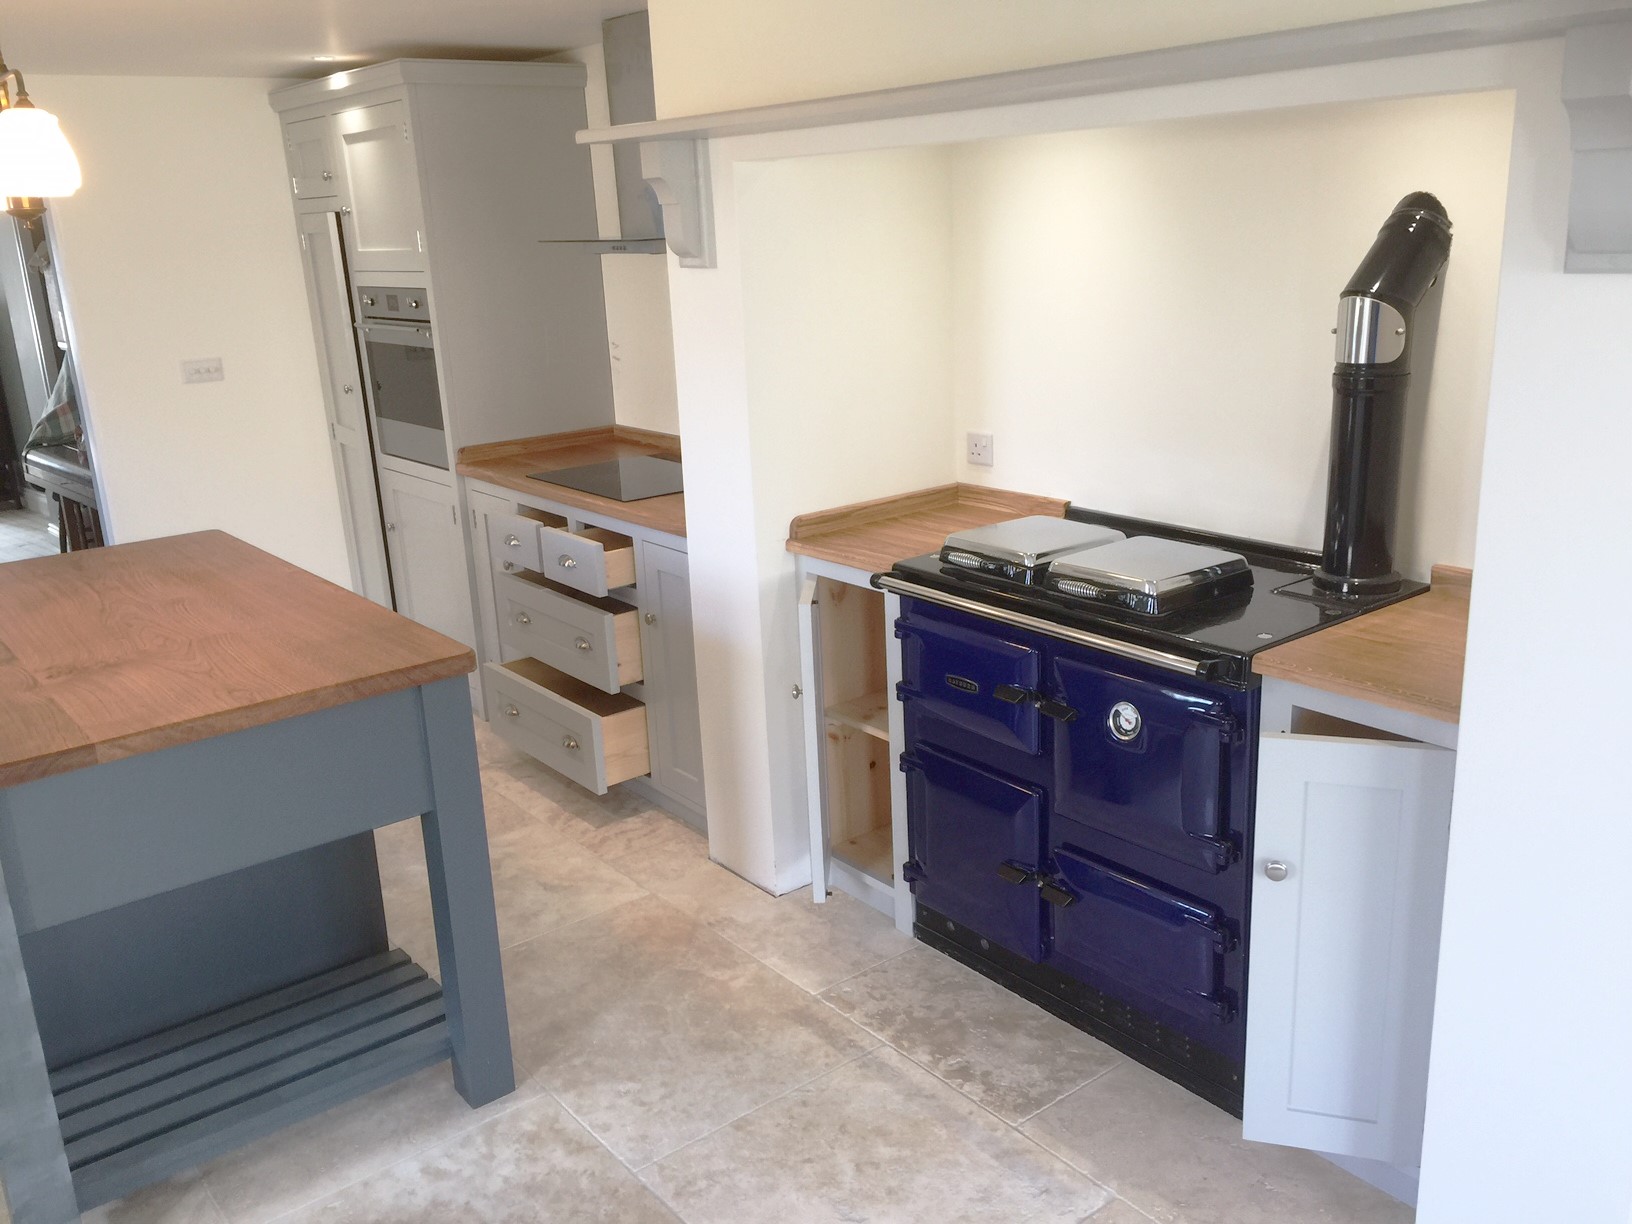 Individually tailored shaker style fitted kitchen hand made from solid wood painted in Farrow & Ball pavillion grey. Fully bespoke island site with wide plank solid oak surface top.